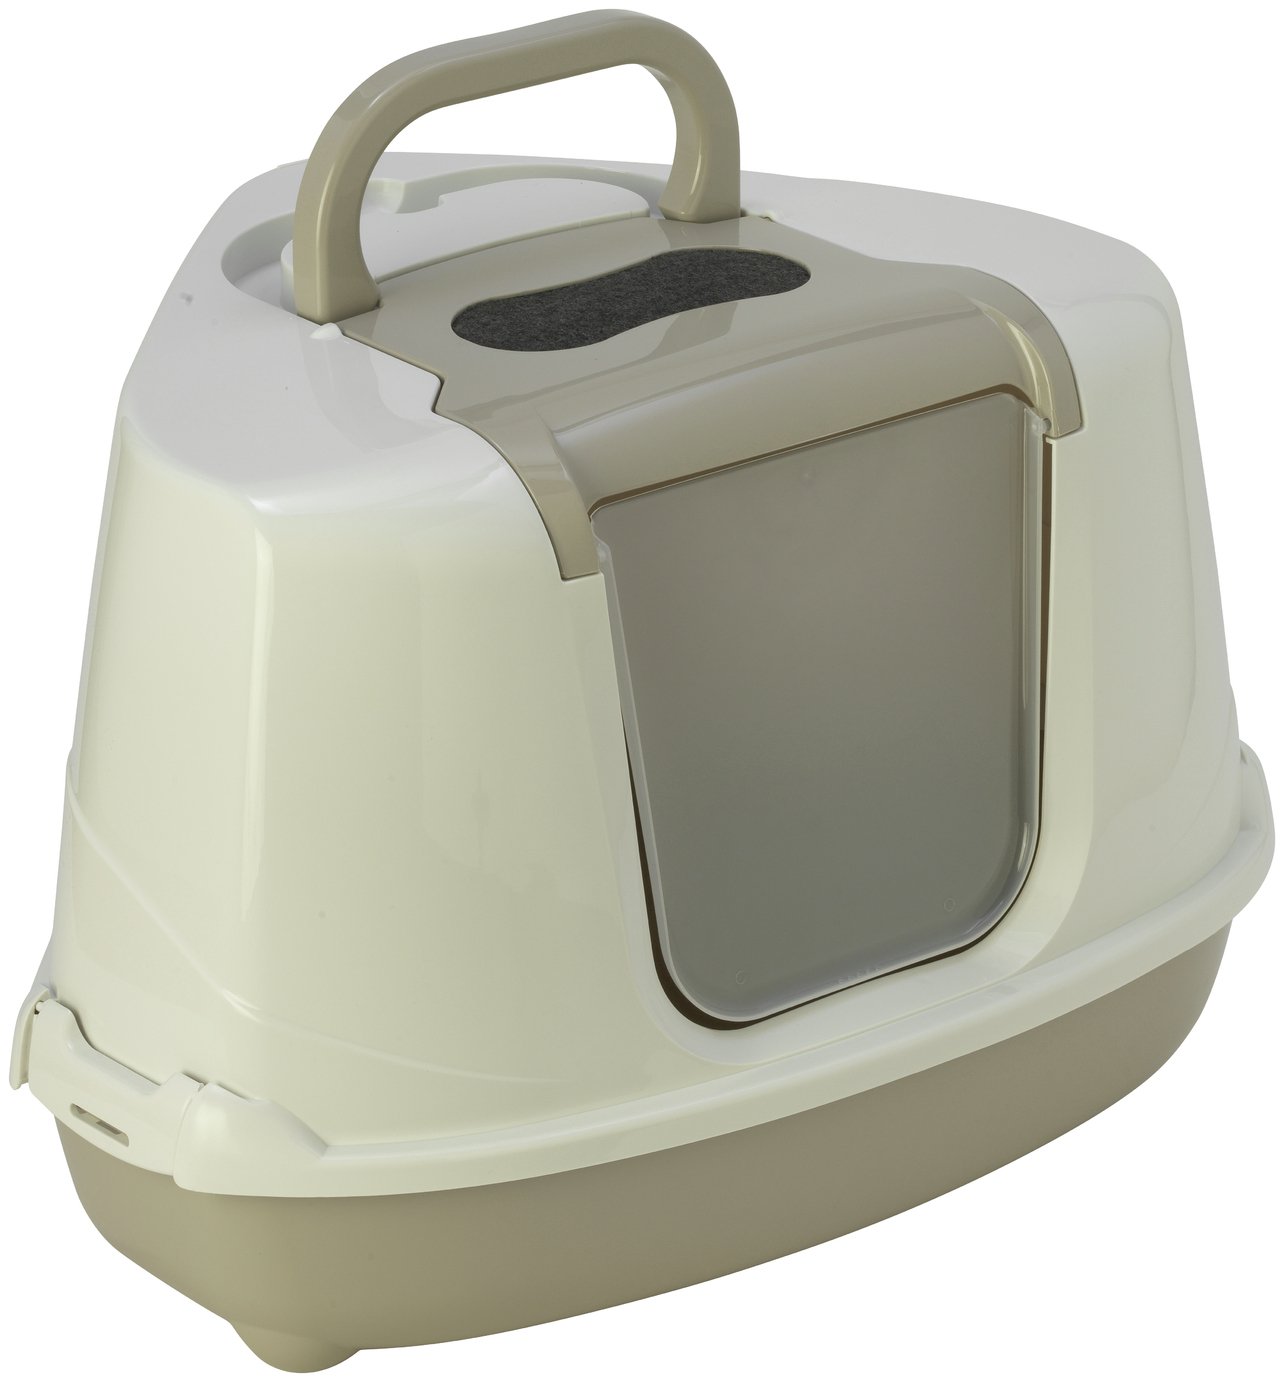 Petface Corner Litter Tray with Hood